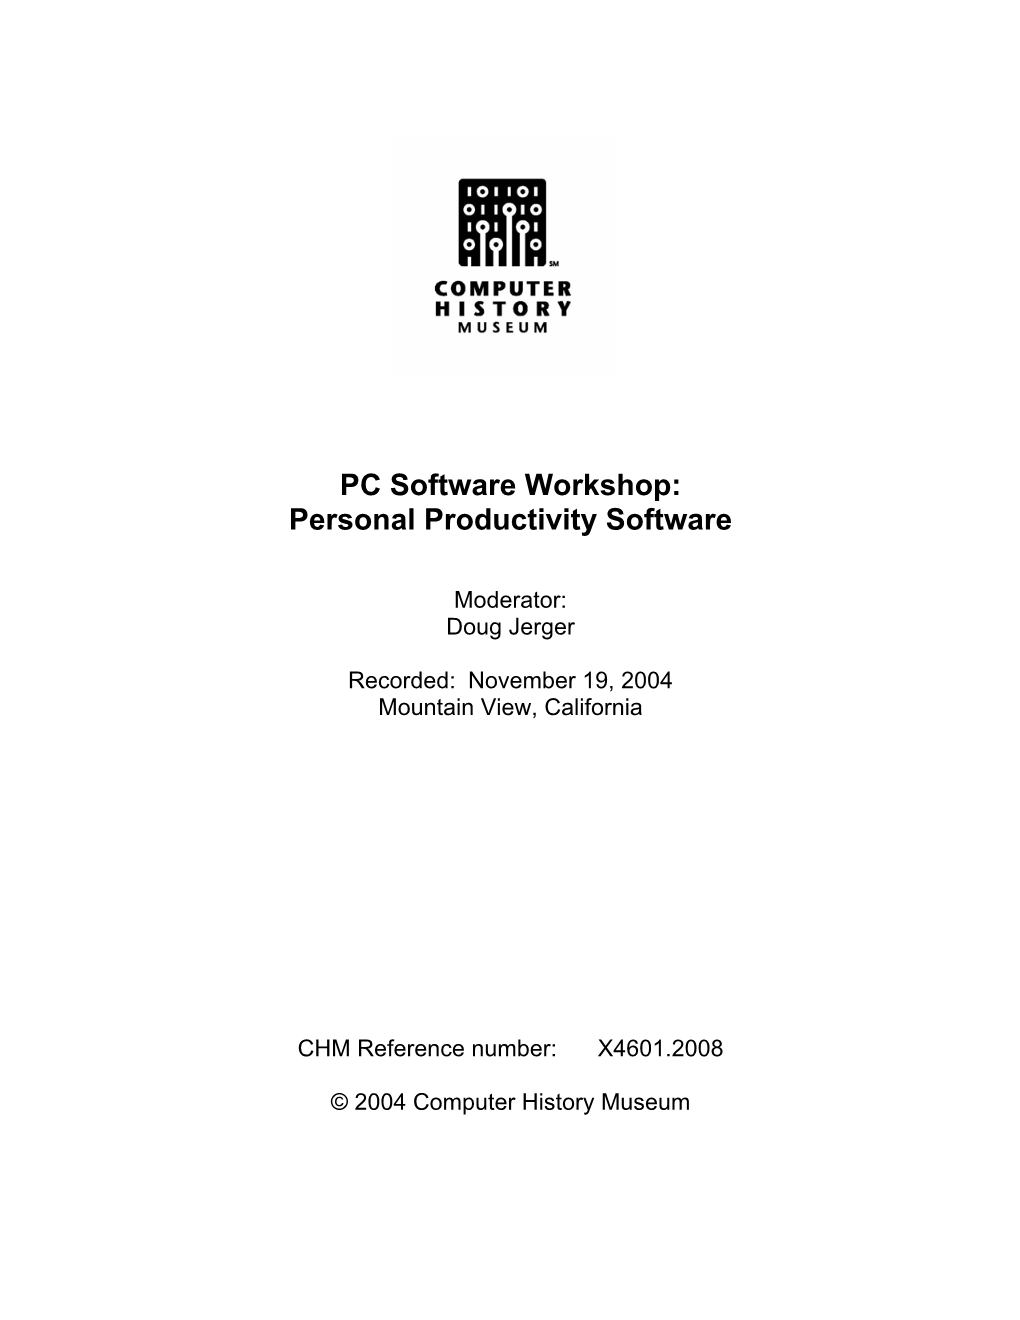 PC Software Workshop: Personal Productivity Software